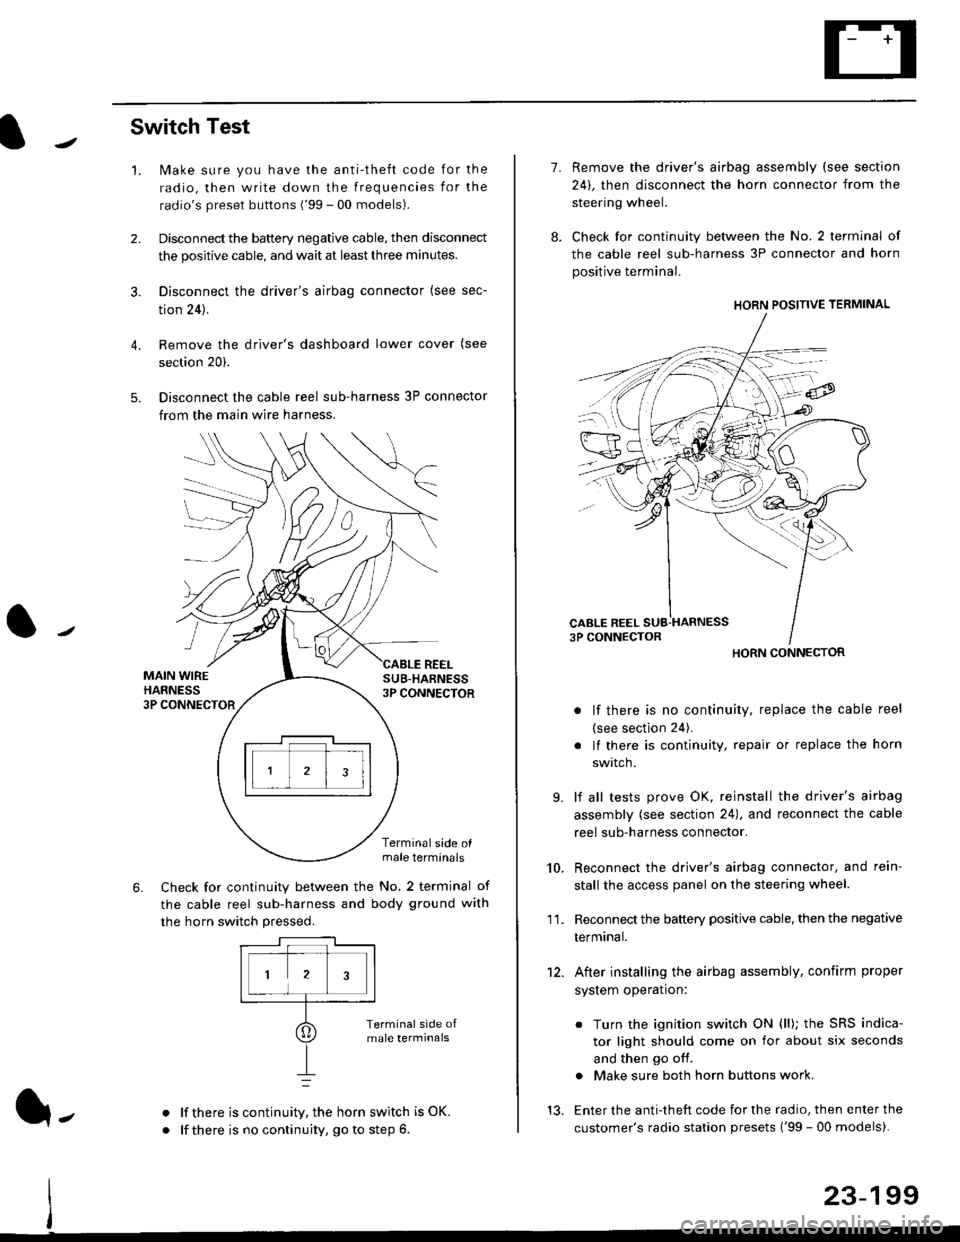 HONDA CIVIC 1998 6.G Workshop Manual Switch Test
lMake sure you have the anti-theft code for the
radio, then write down the frequencies for the
radios preset buttons (99 - 00 models).
Disconnect the battery negative cable, then disconn